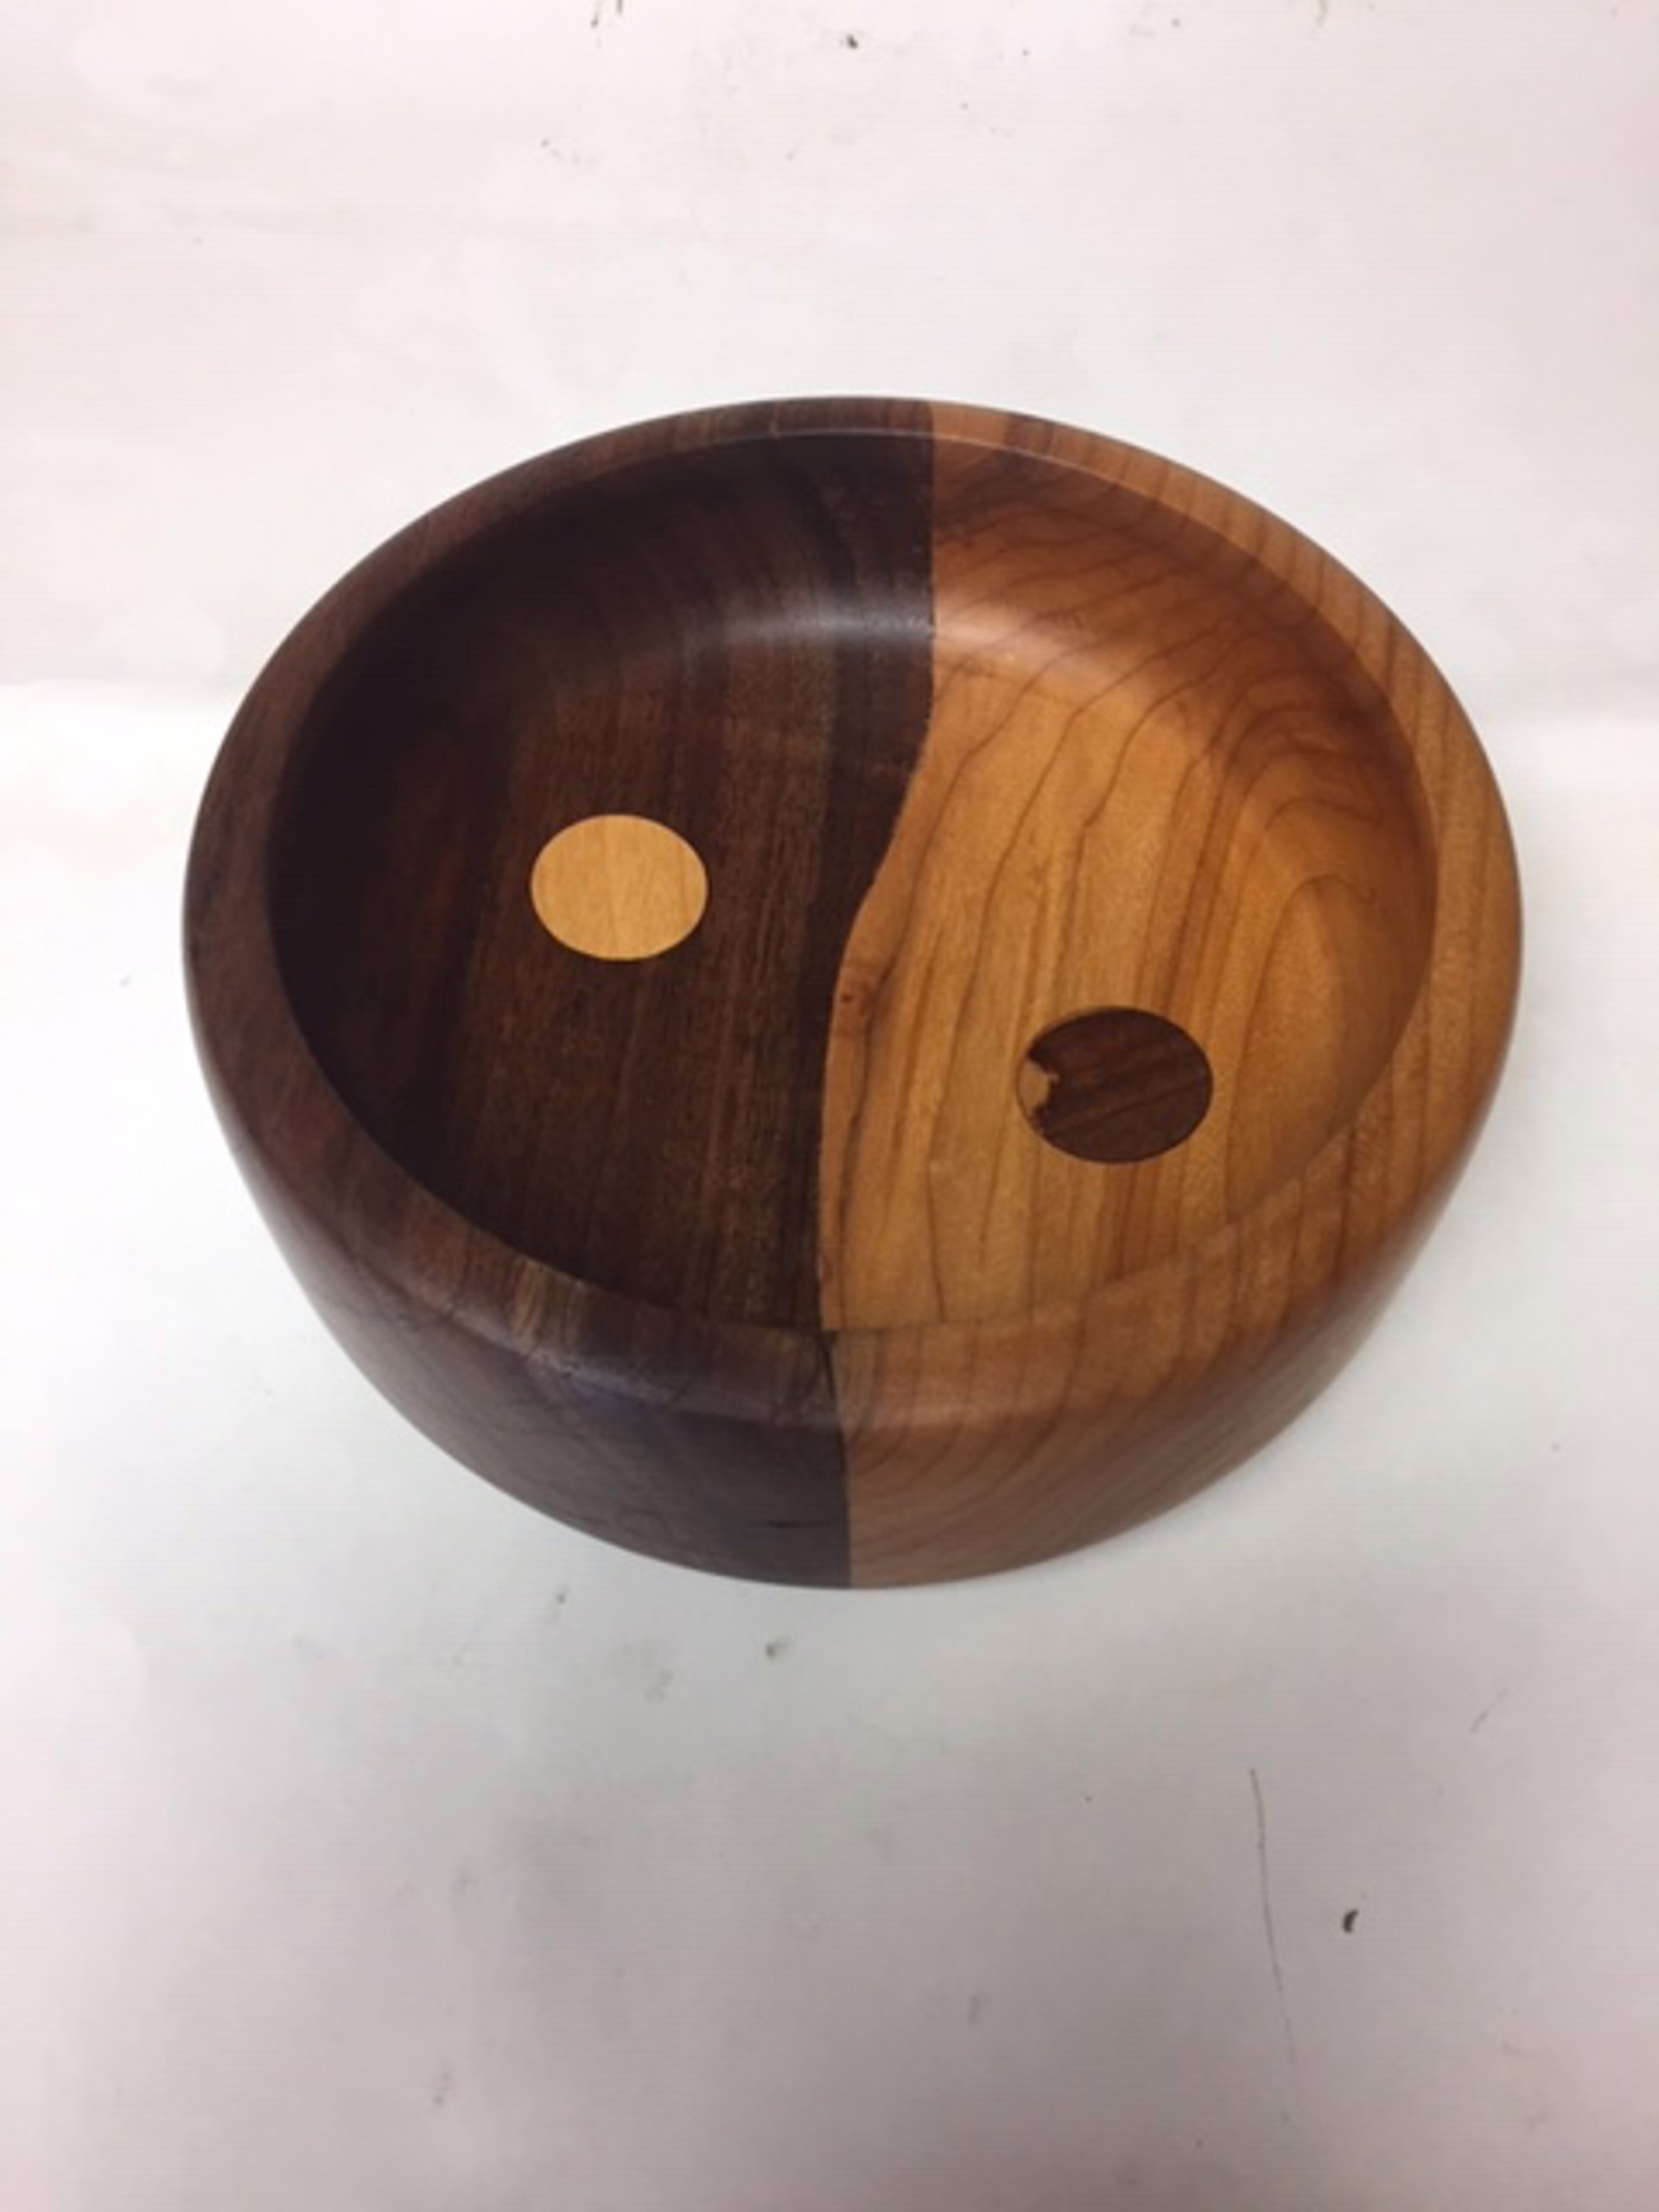 Turned Wood Bowl  #20-80 by Rick Squires